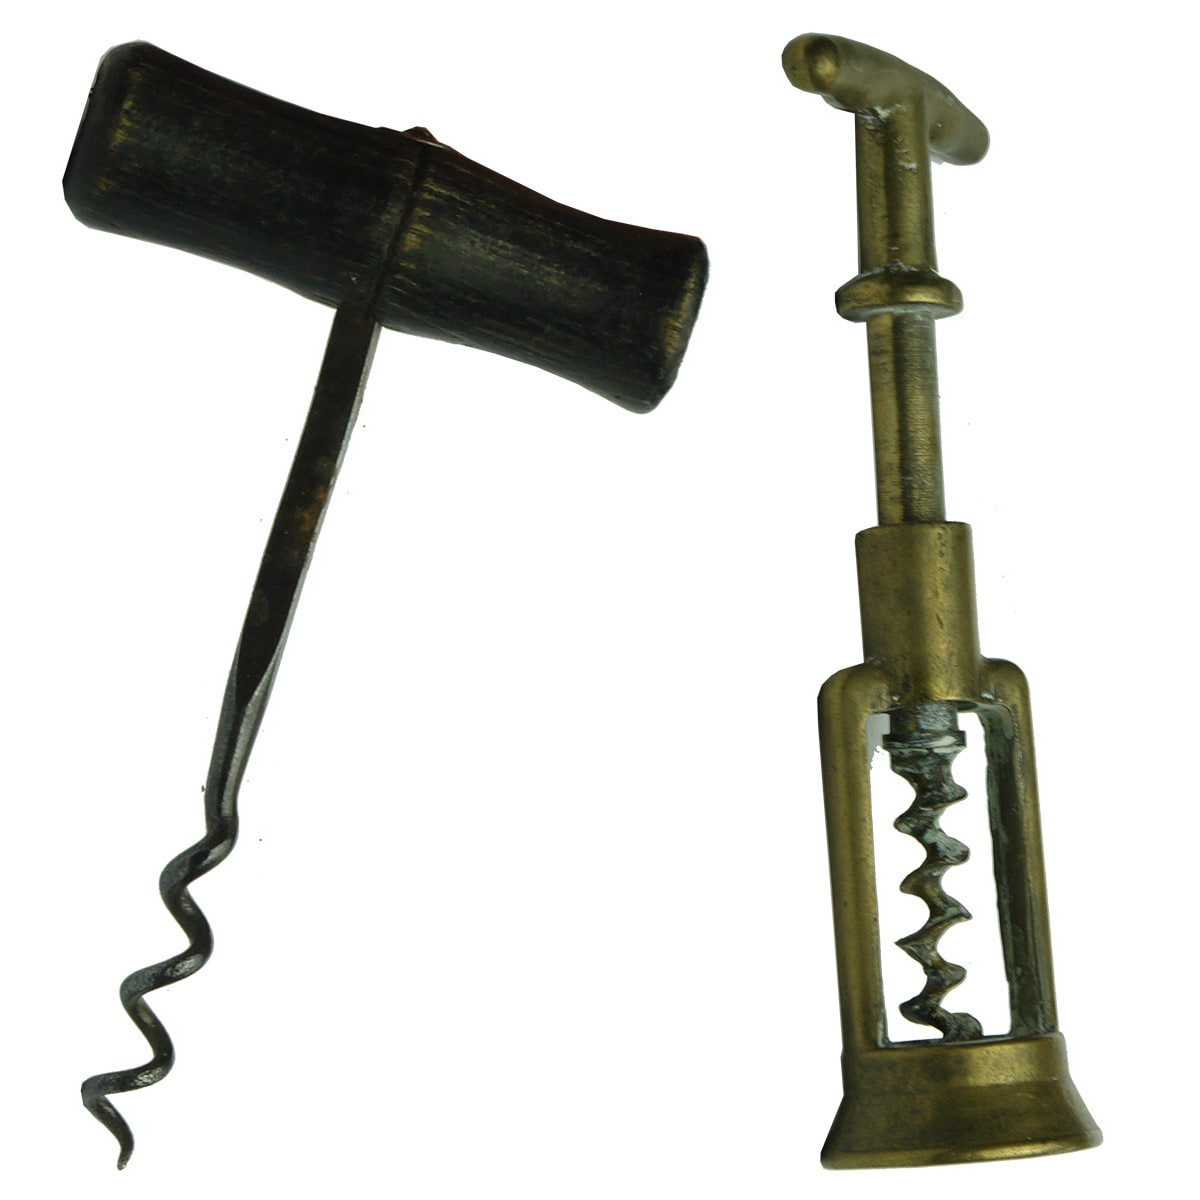 Two corkscrews. Solid brass and a wooden handled variety.